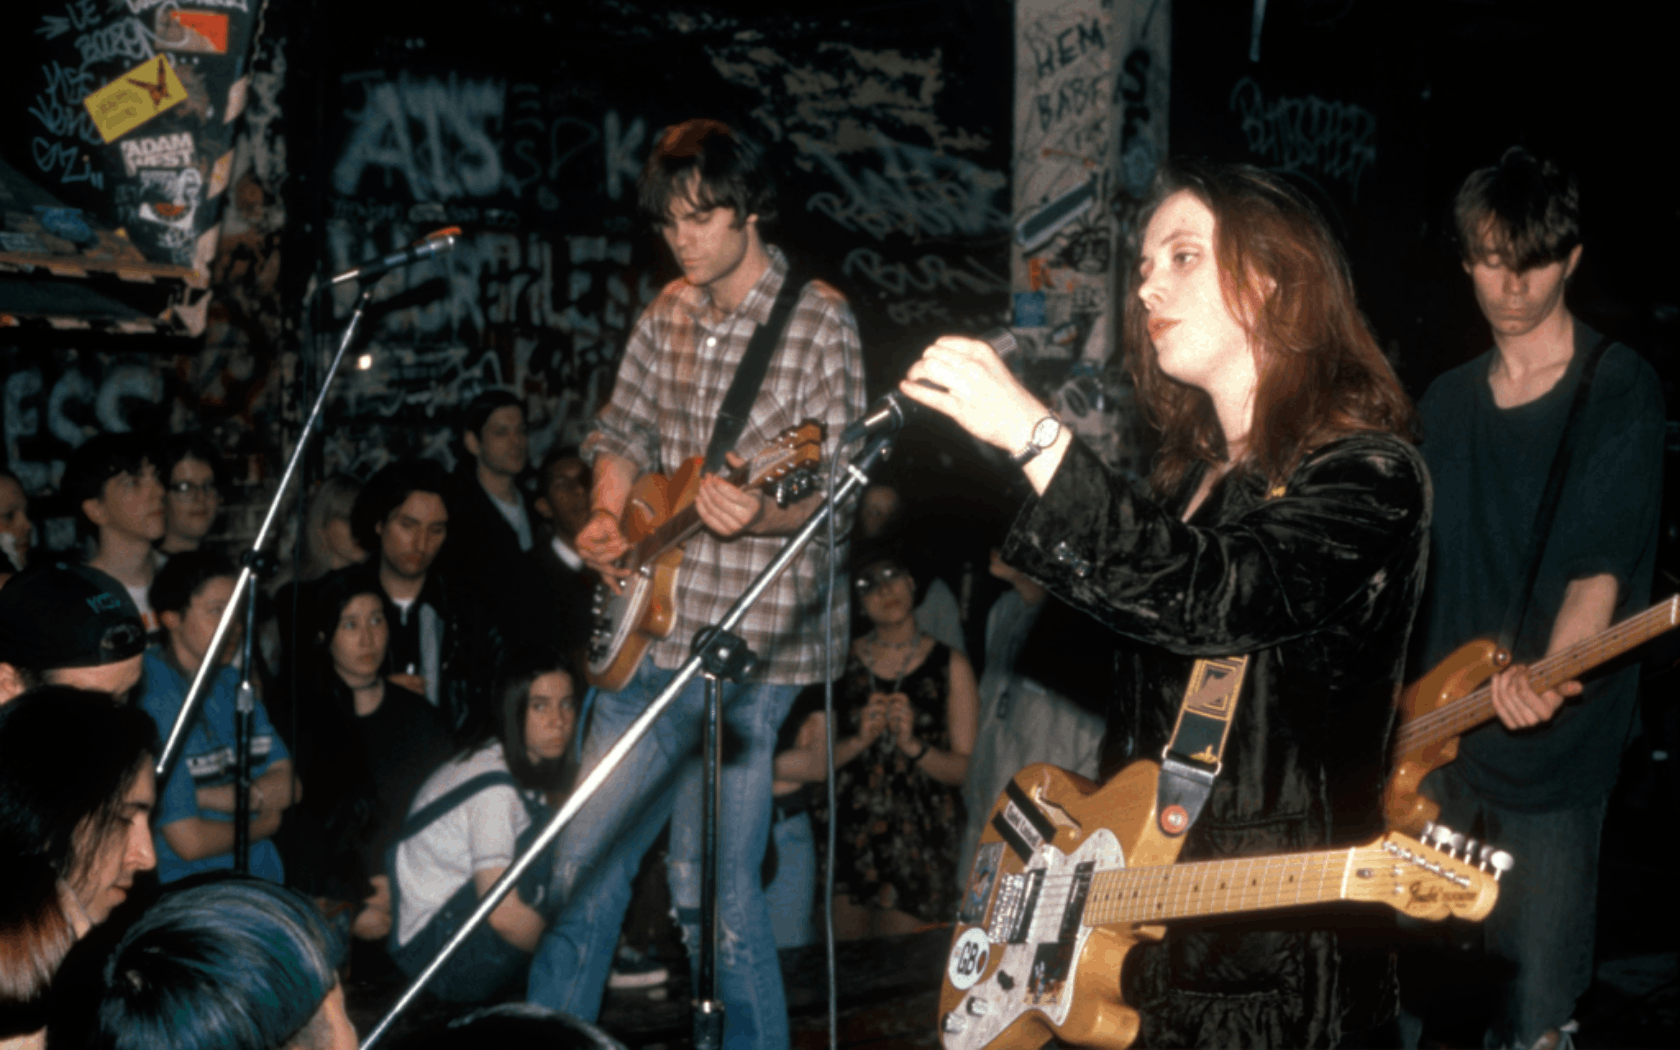 slowdive performing in 1994